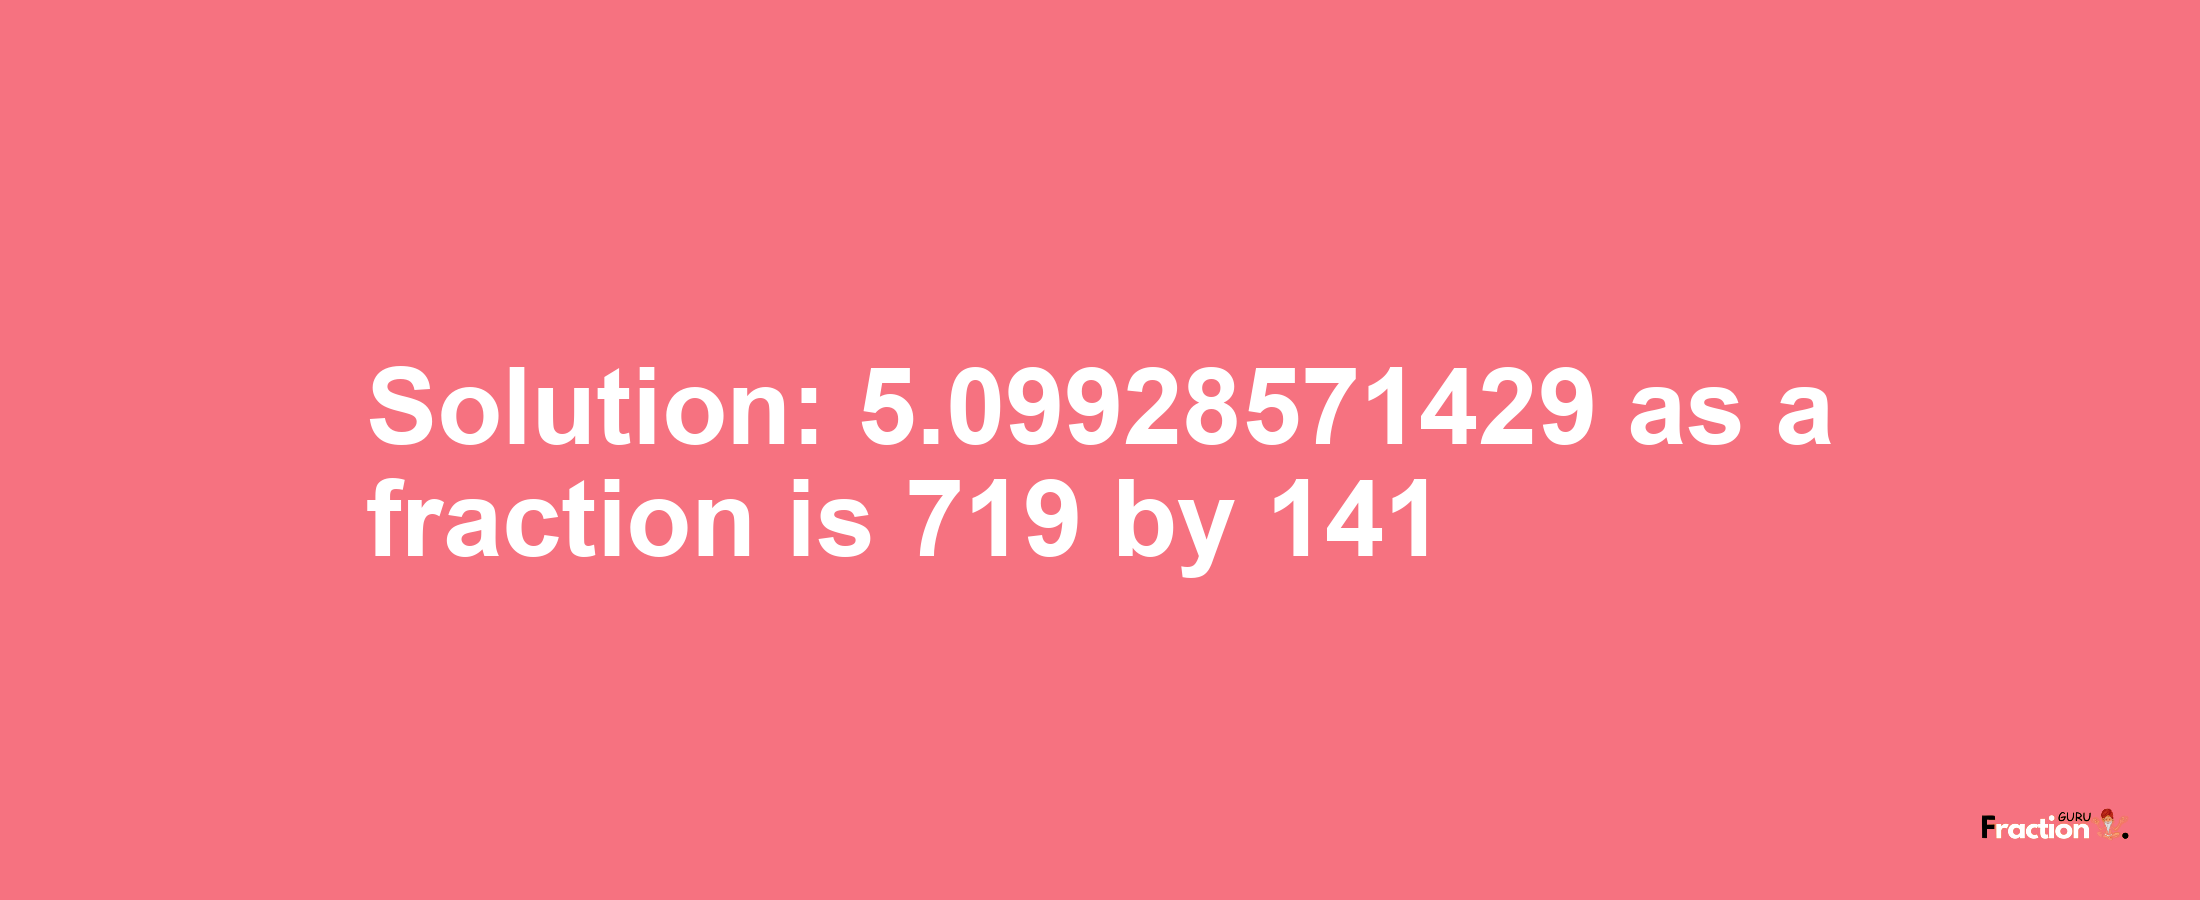 Solution:5.09928571429 as a fraction is 719/141